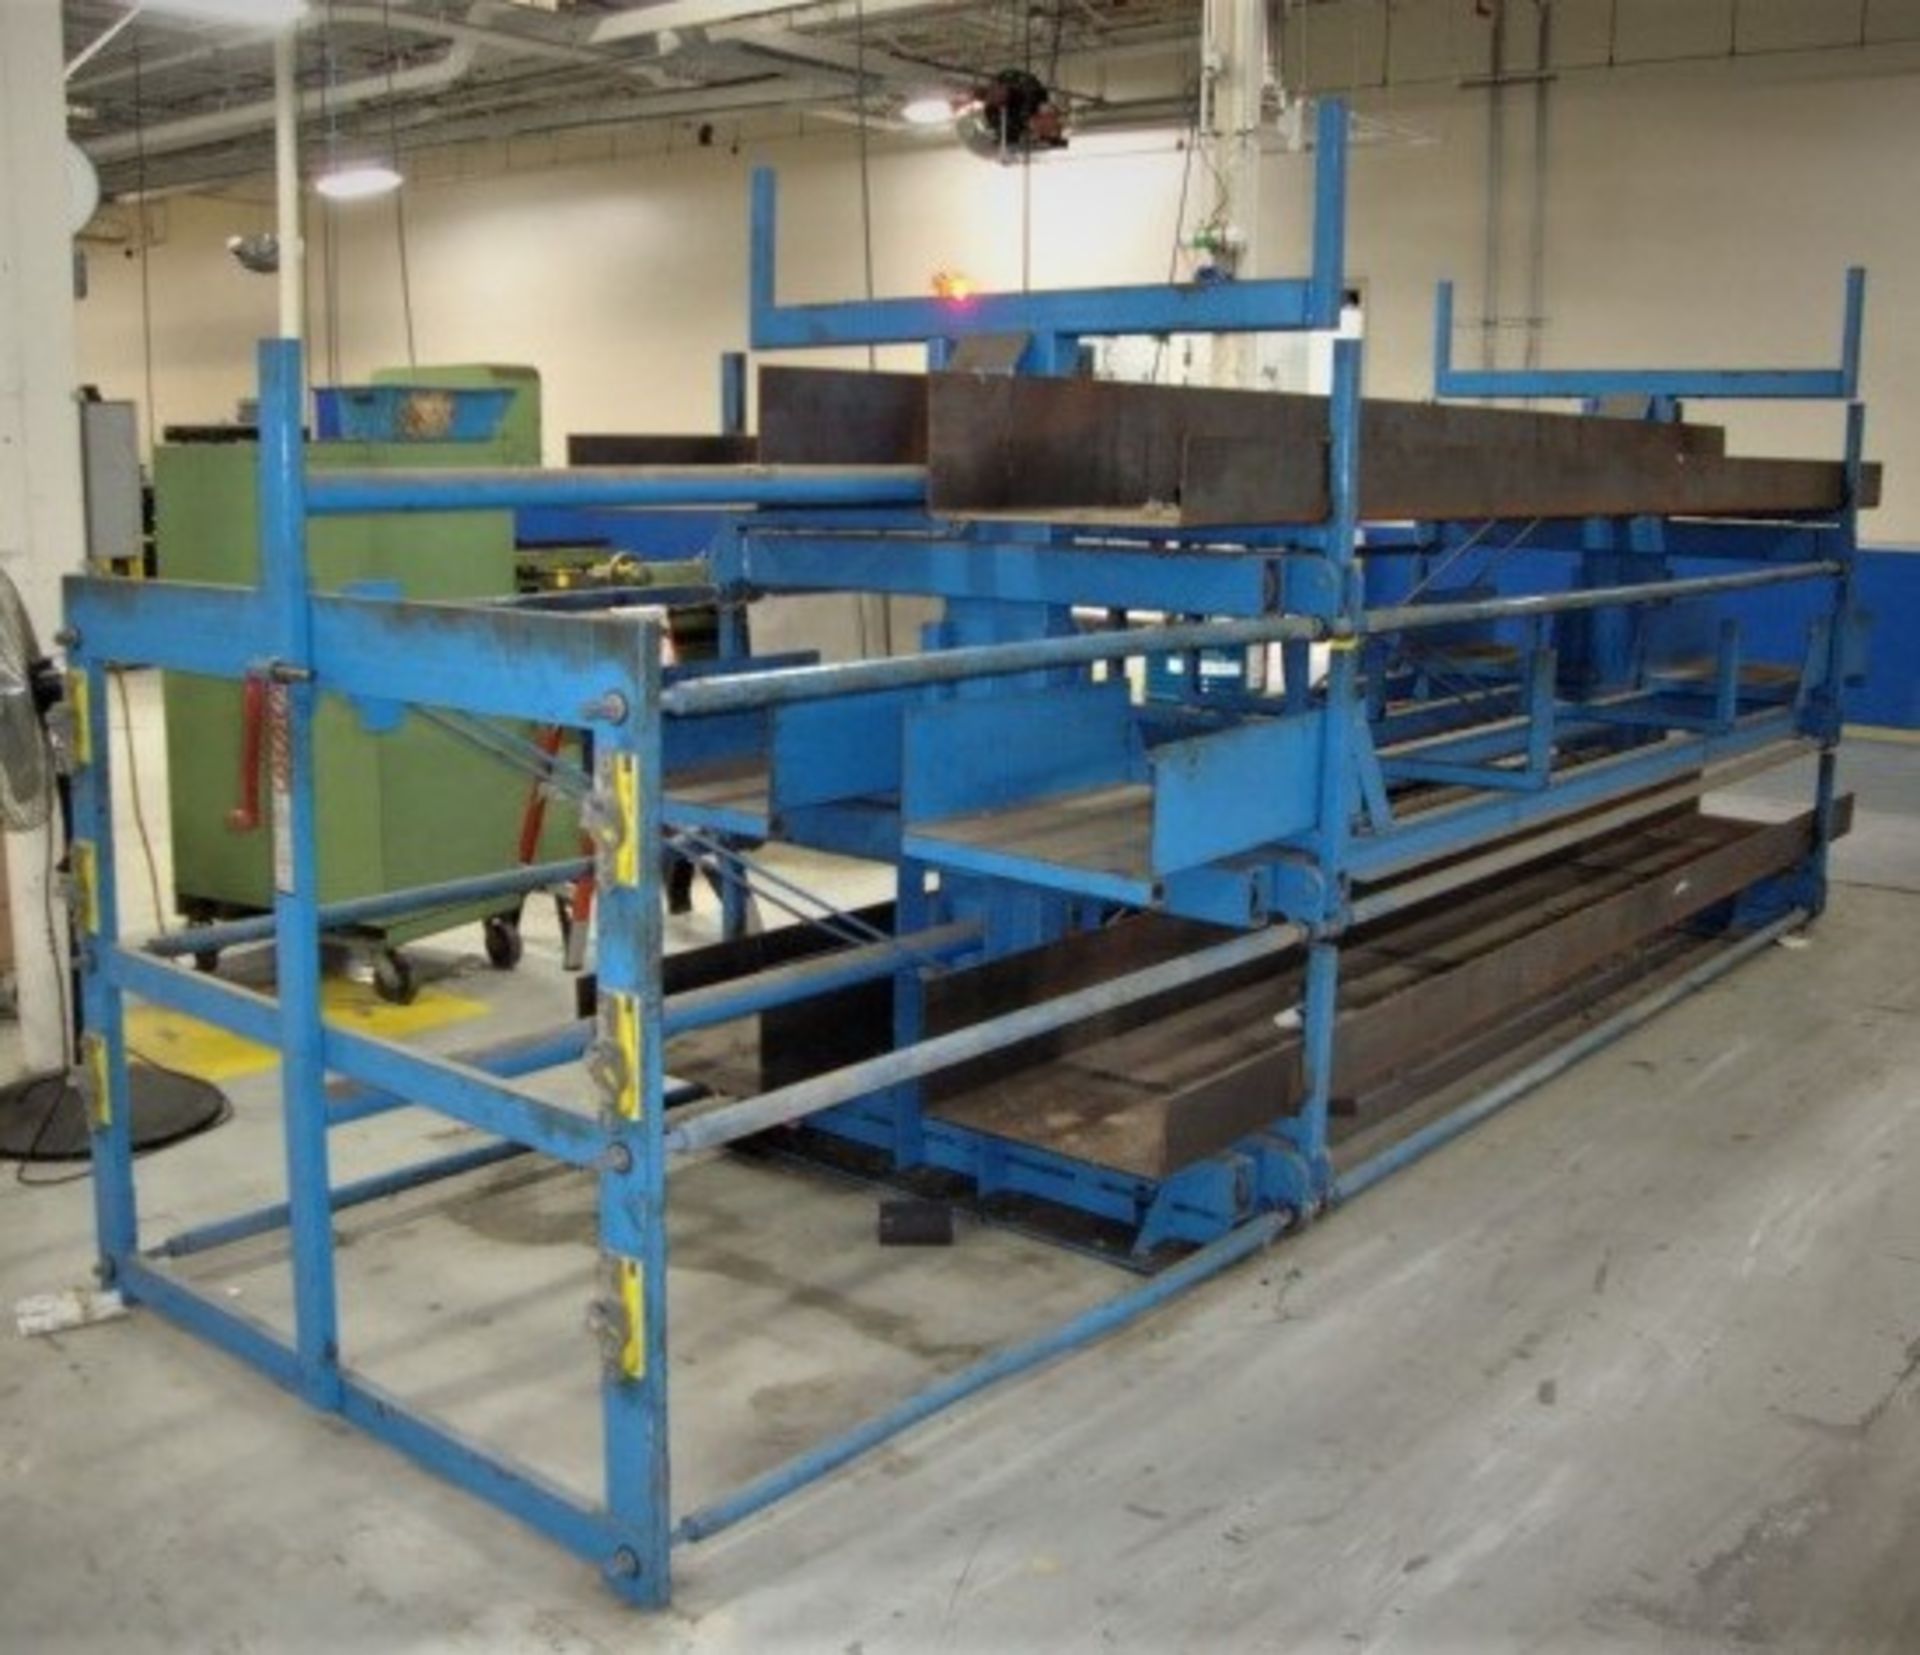 Steel Storage Systems Inc HD Double Sided Crank Out Material Rack, approx 21' x 6' x 8' tall - Image 2 of 7